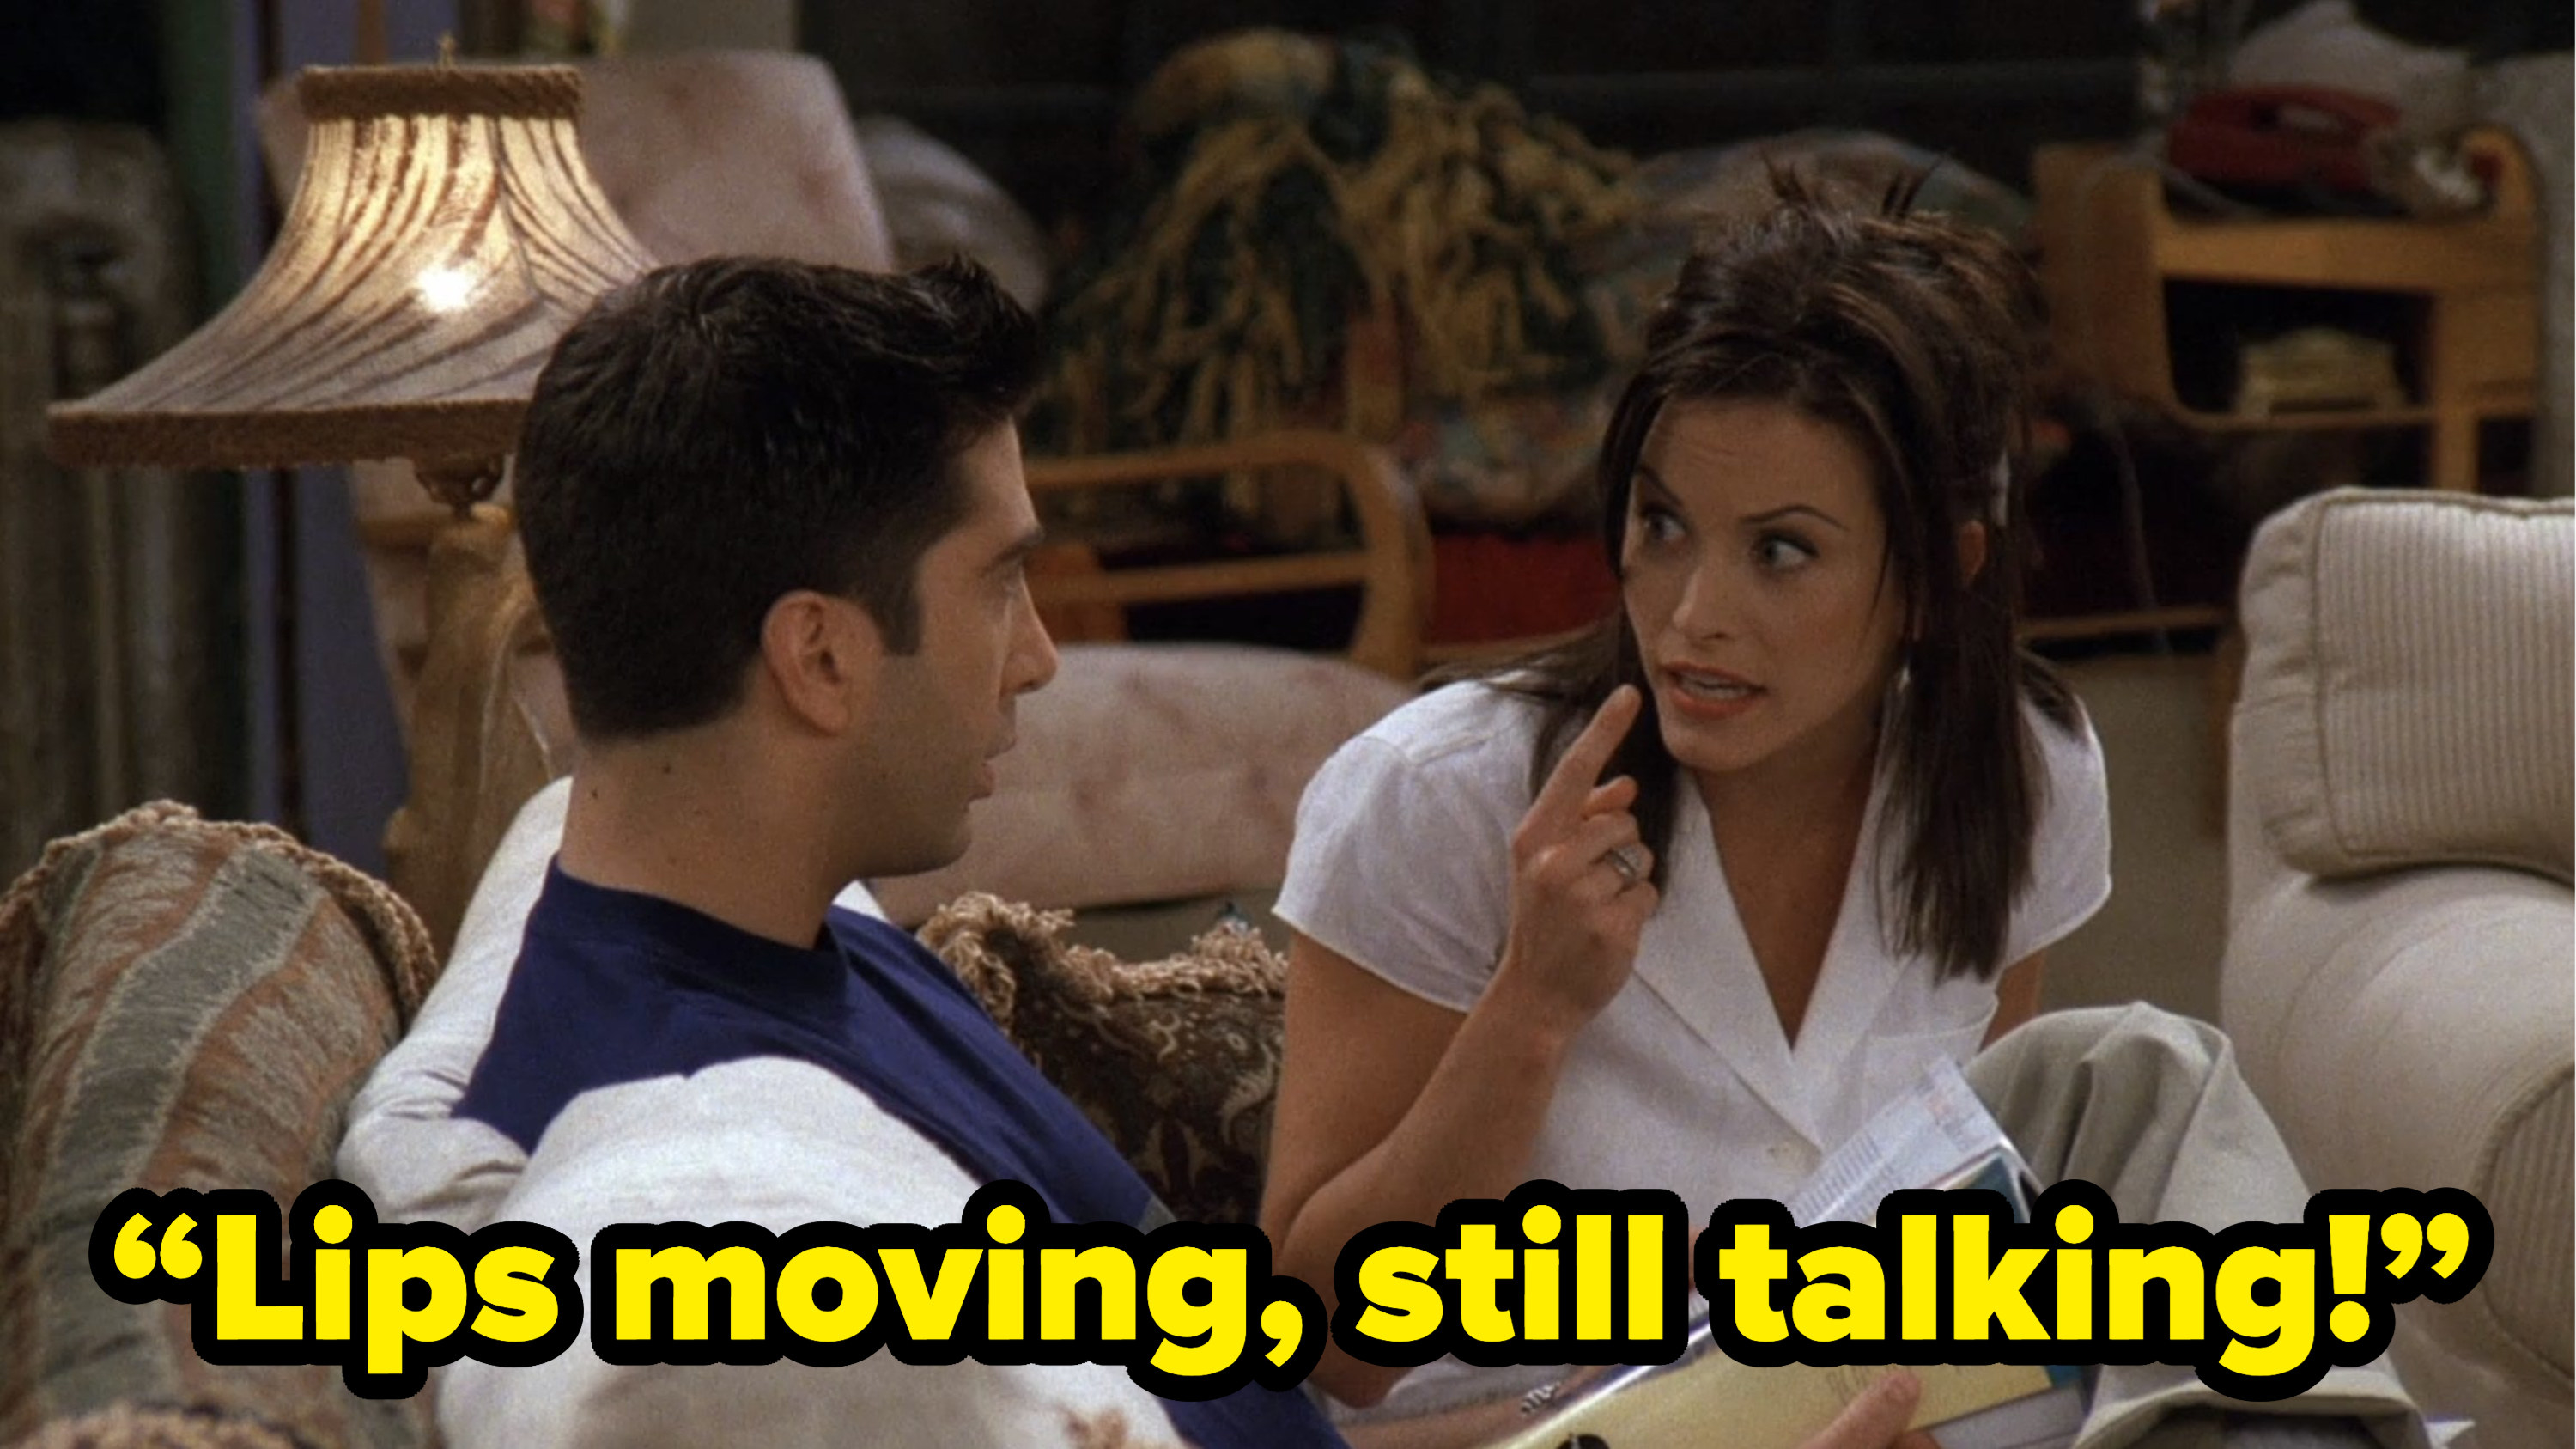 monica saying to ross “Lips moving, still talking!” on friends